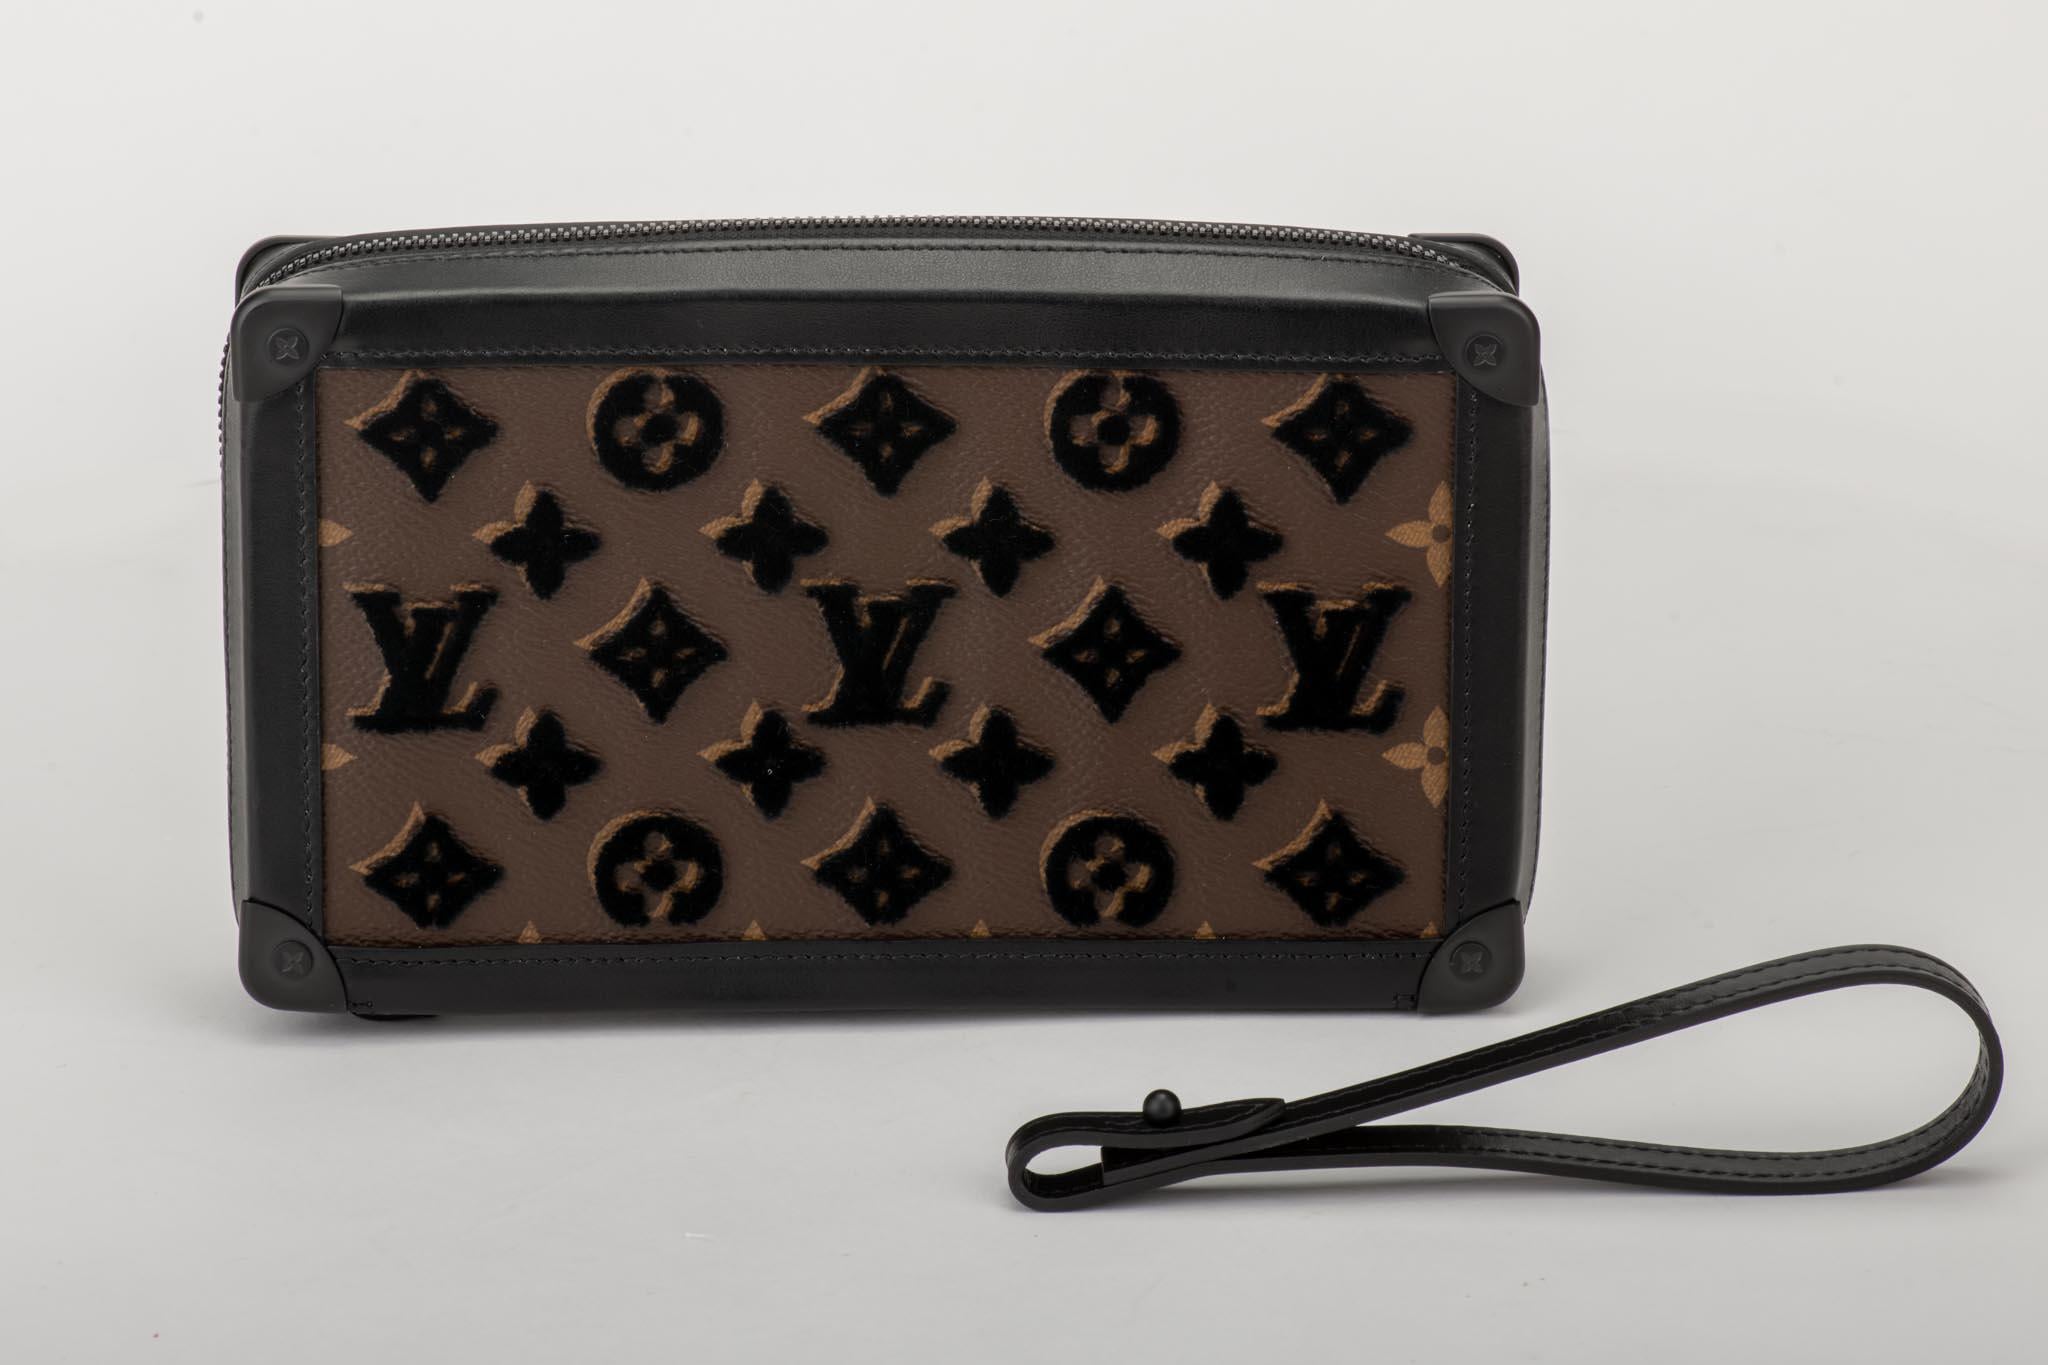 Louis Vuitton runway spring summer 2020 clutch with detachable wristlet. Coated monogram canvas with raised black velvet letters. Brand new, comes with dust cover and box.